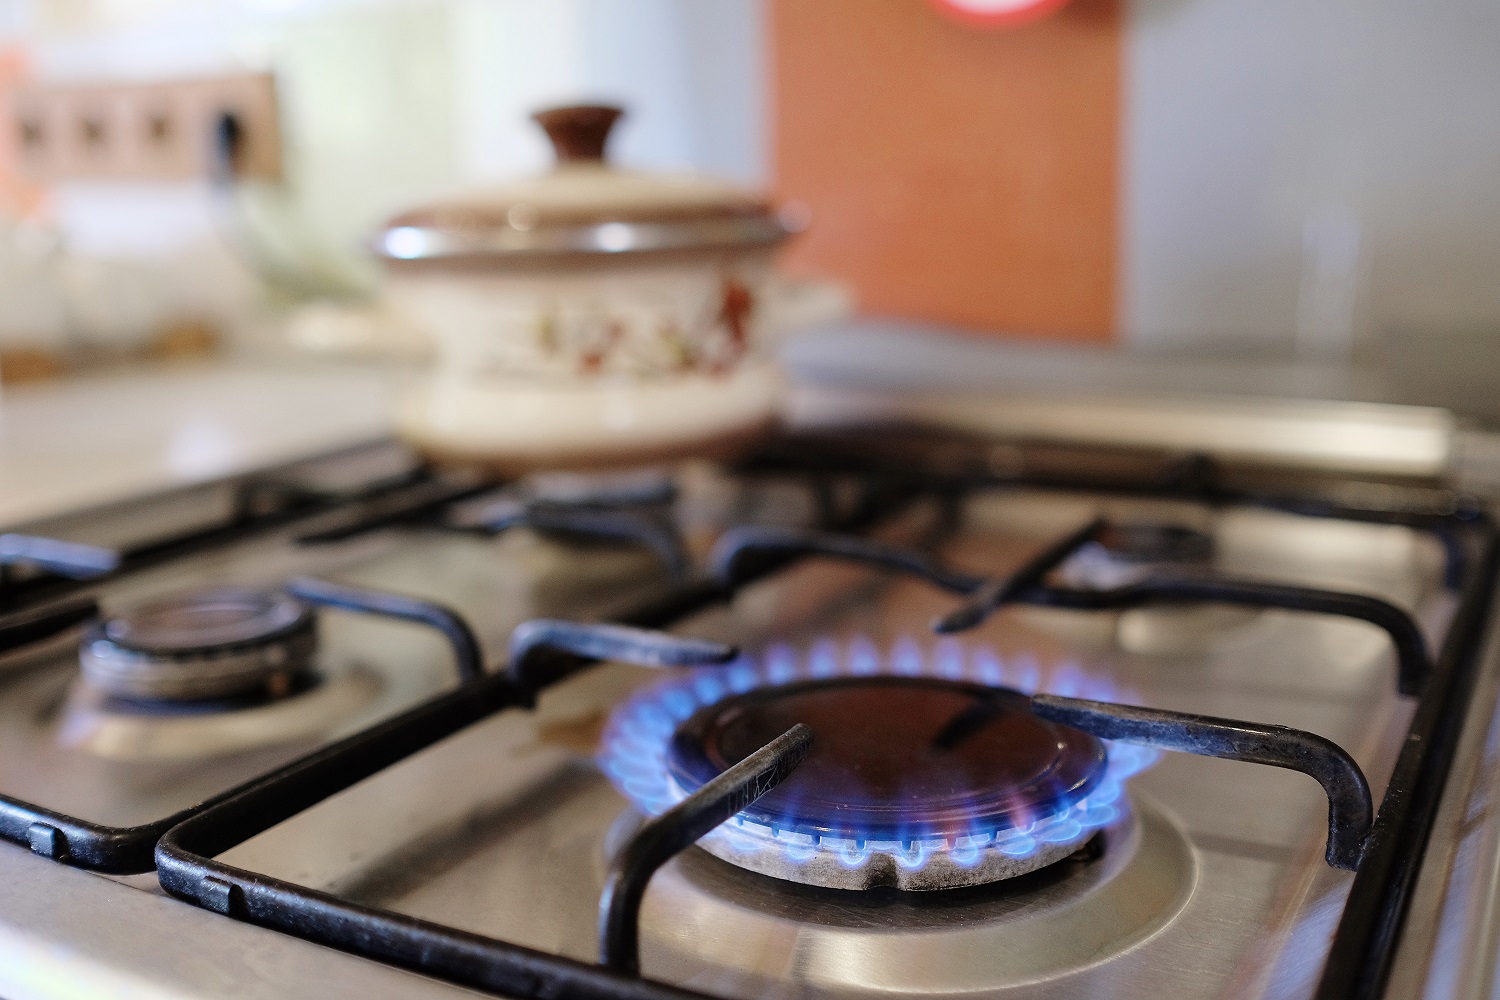 stove-natural-gas-safety-home-kitchen-oven